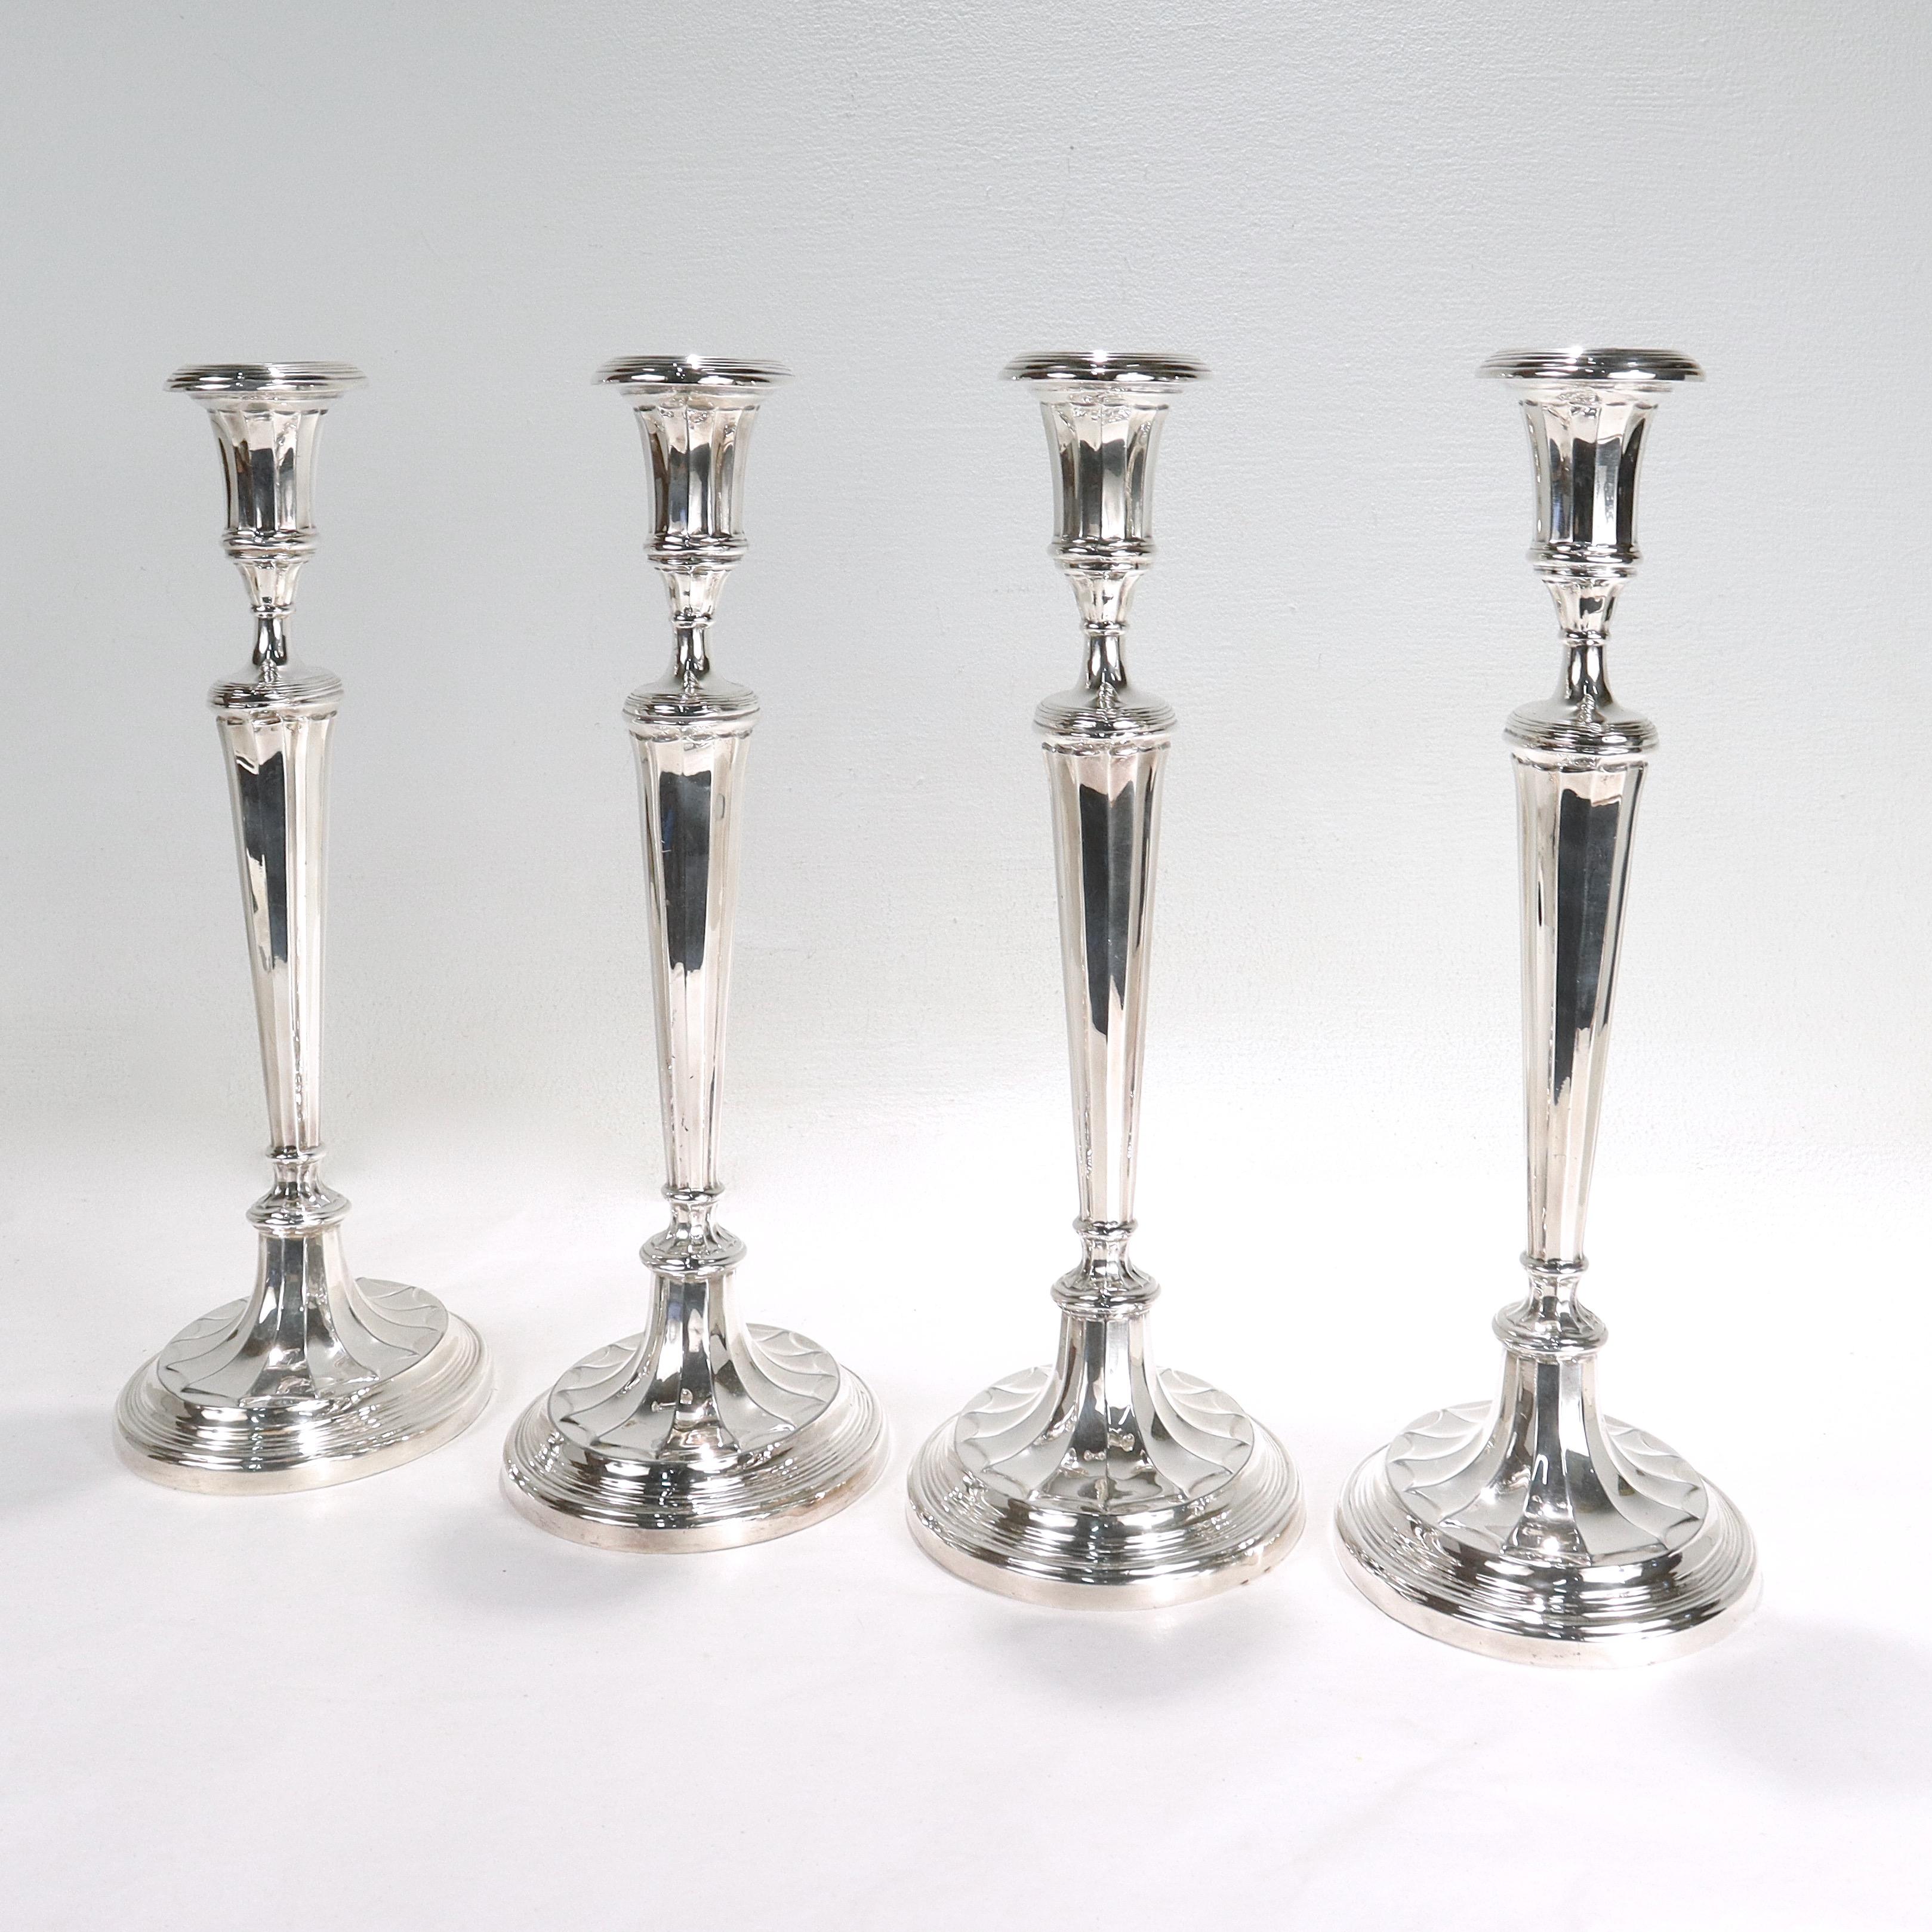 Set of 4 Tall Matched Regency Style Silver Plated Candlesticks In Good Condition For Sale In Philadelphia, PA